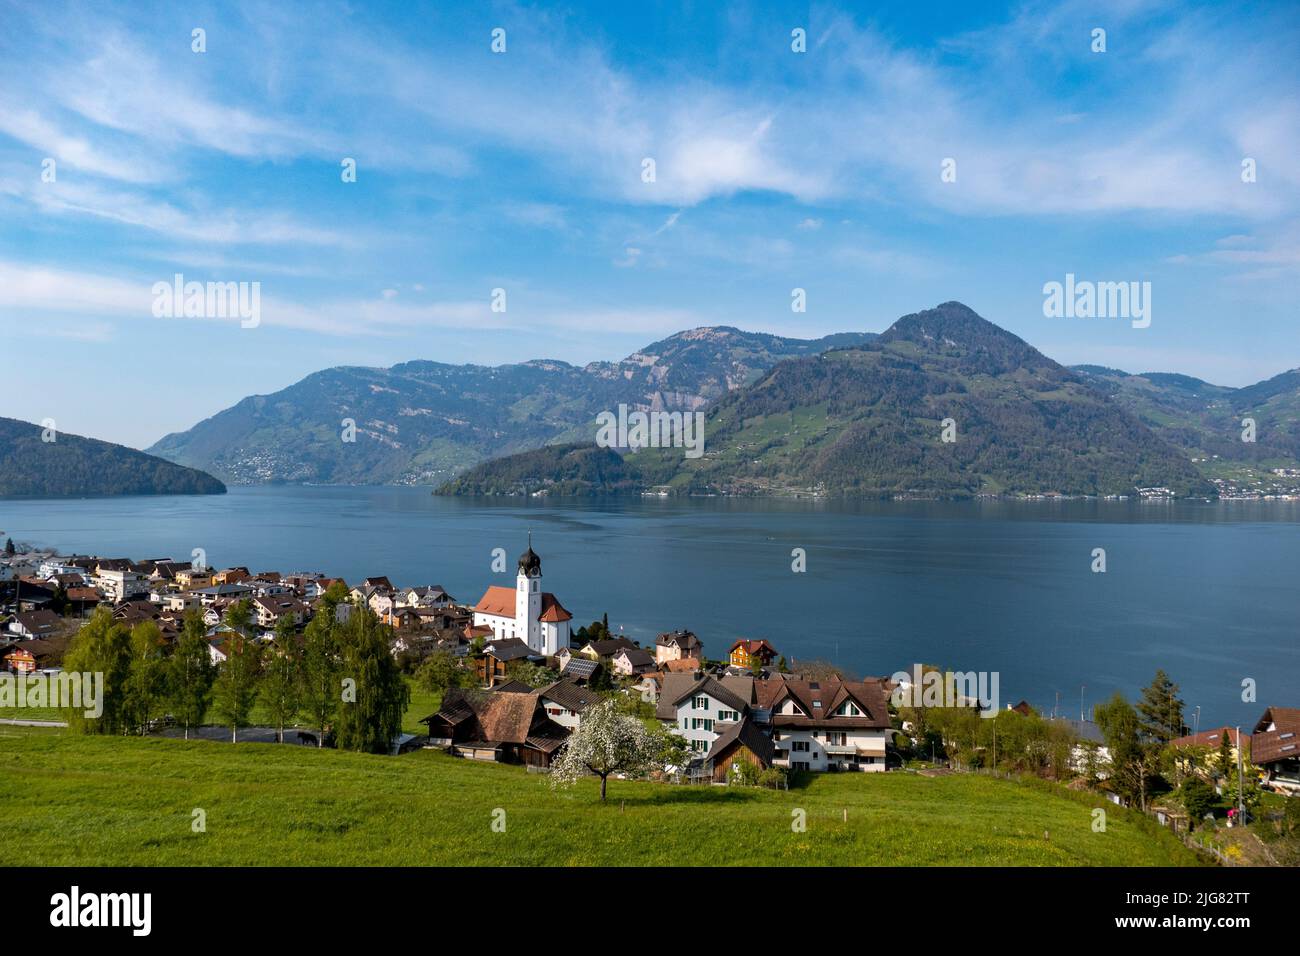 The Beckenried Church by Lake Lucerne with the Alps in the background from the distance Stock Photo